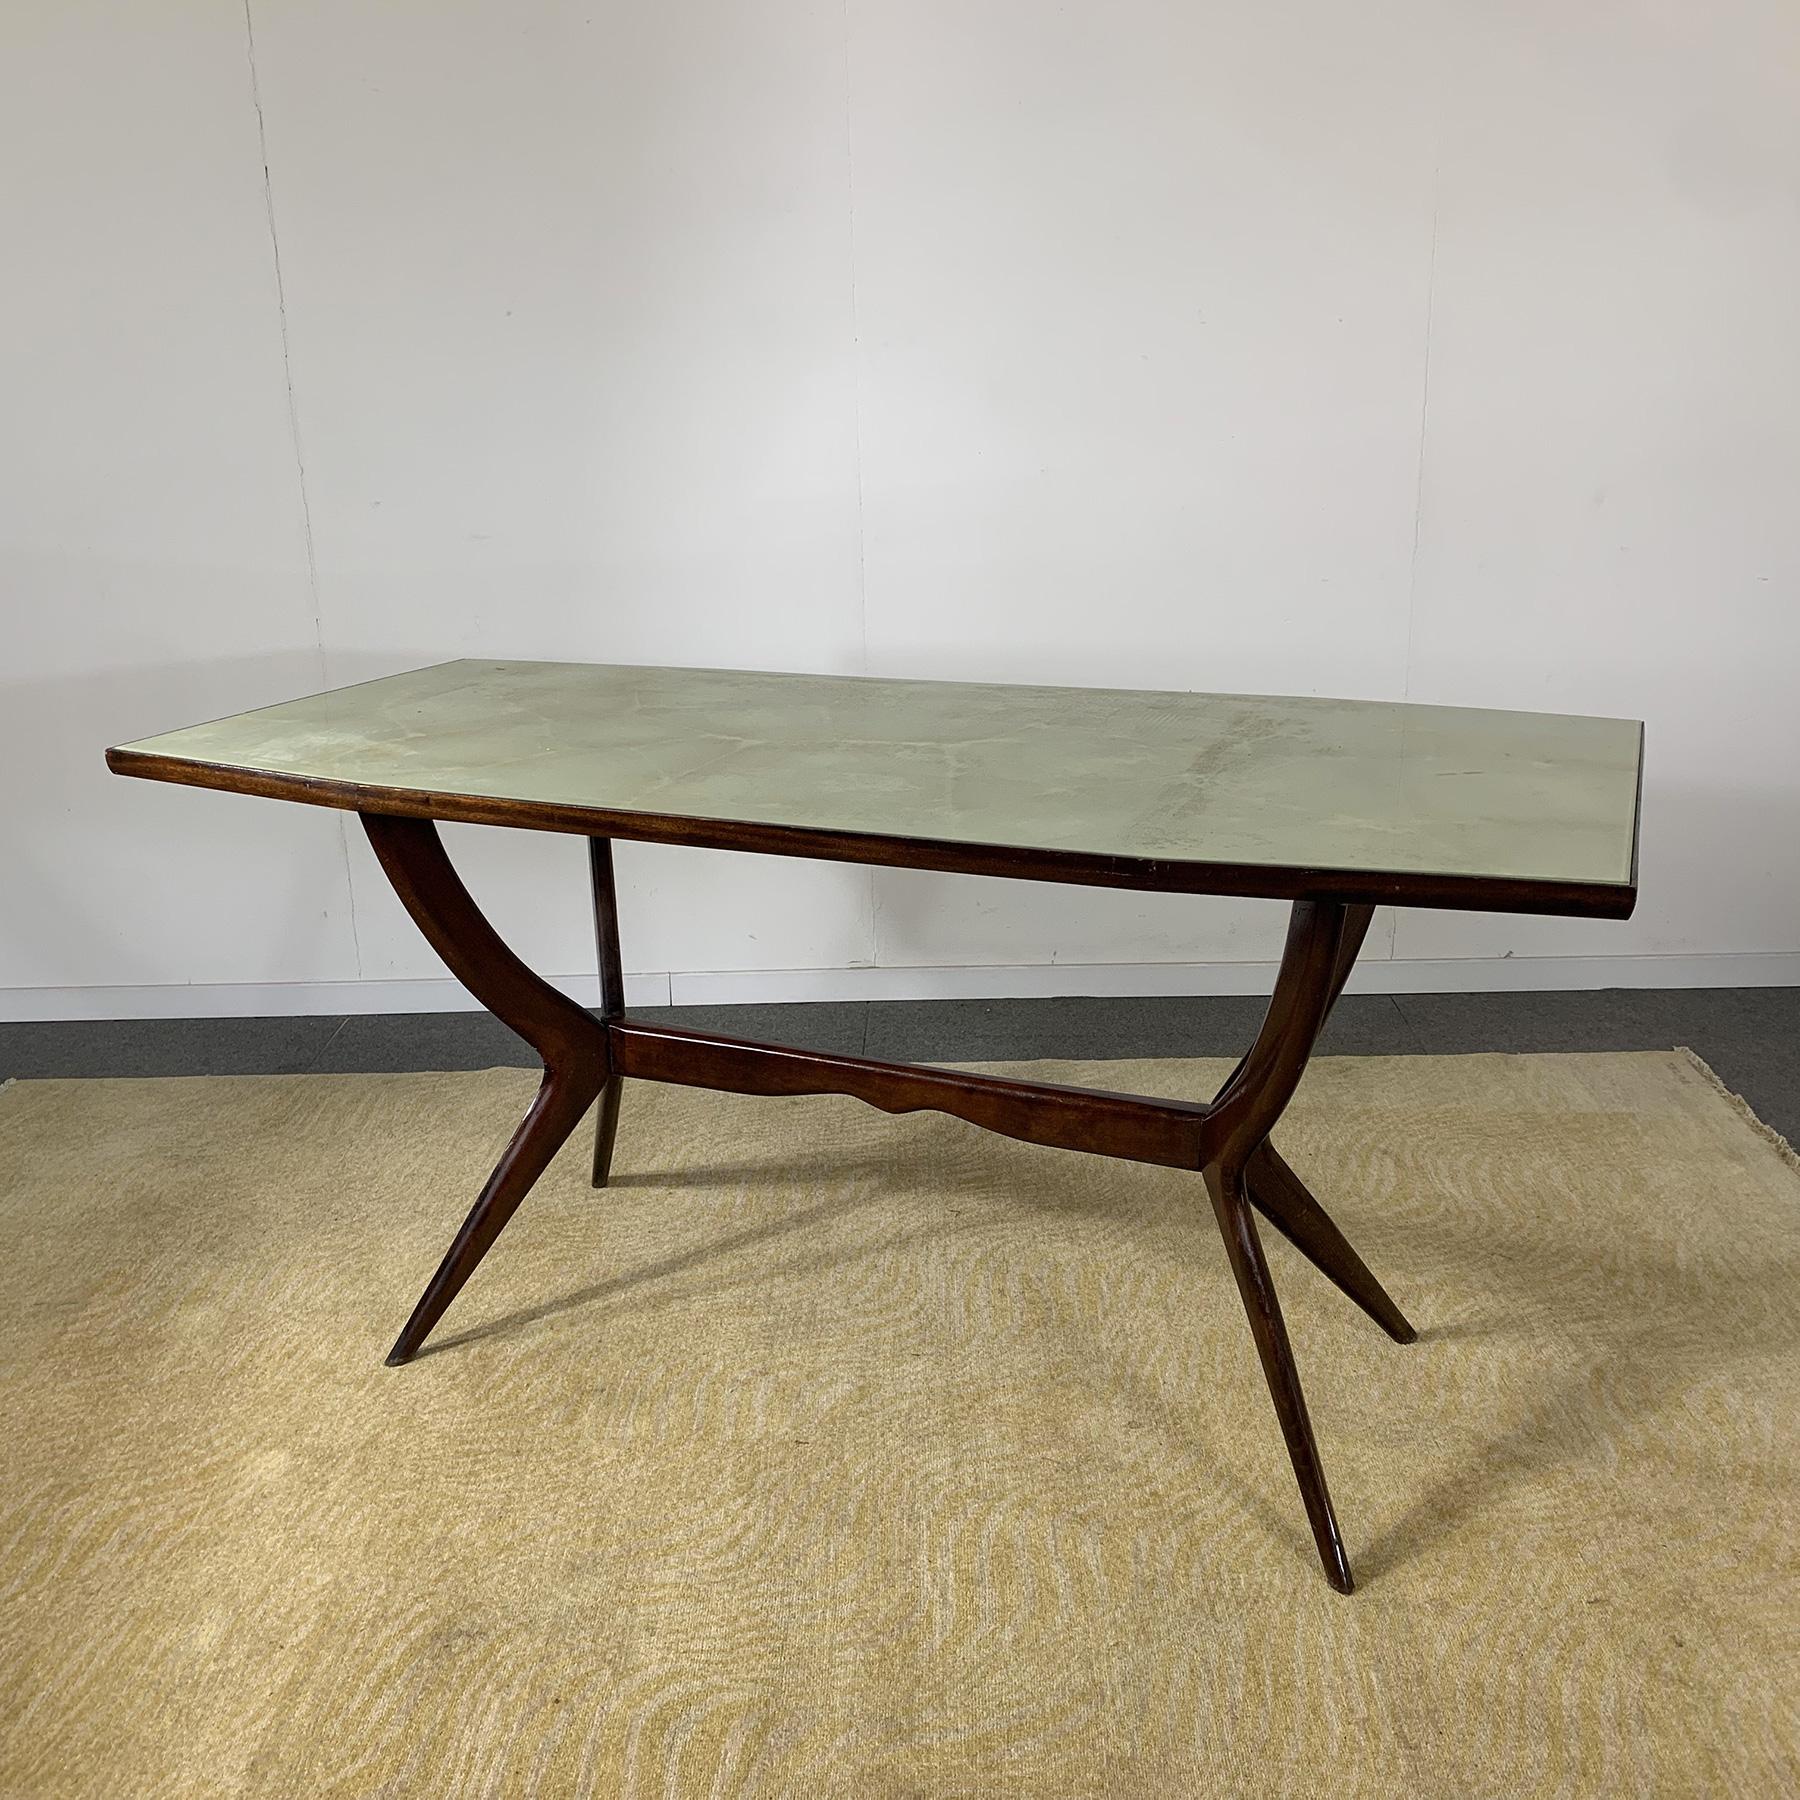 Dining table wooden frame with retro colored glass top in the style of Ico Parisi 1950s production.